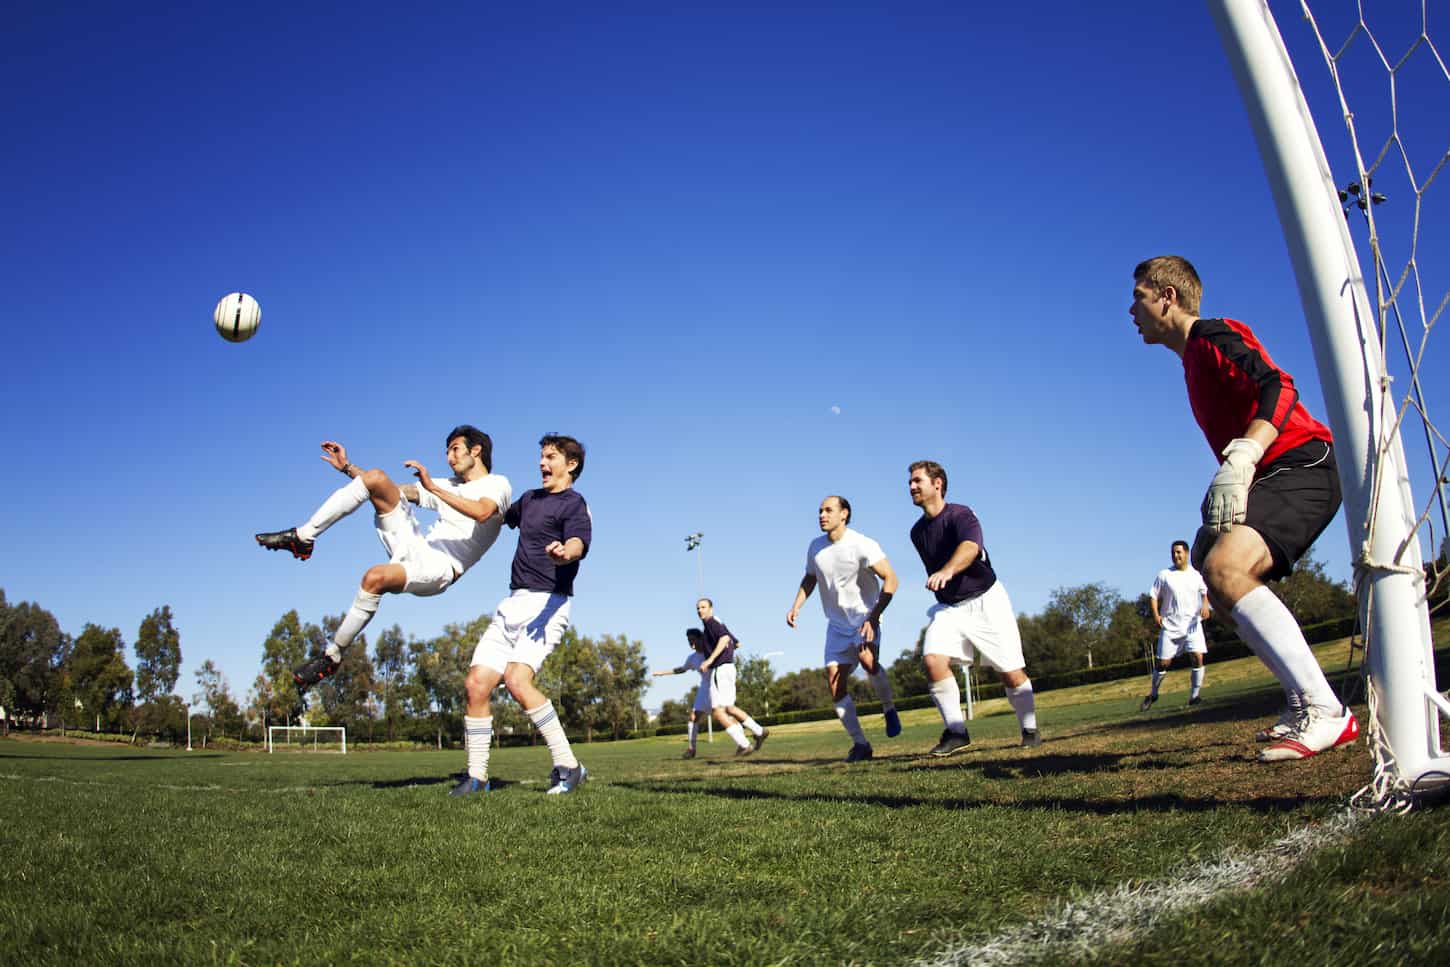 An image of a group of boys Playing Soccer At Field.